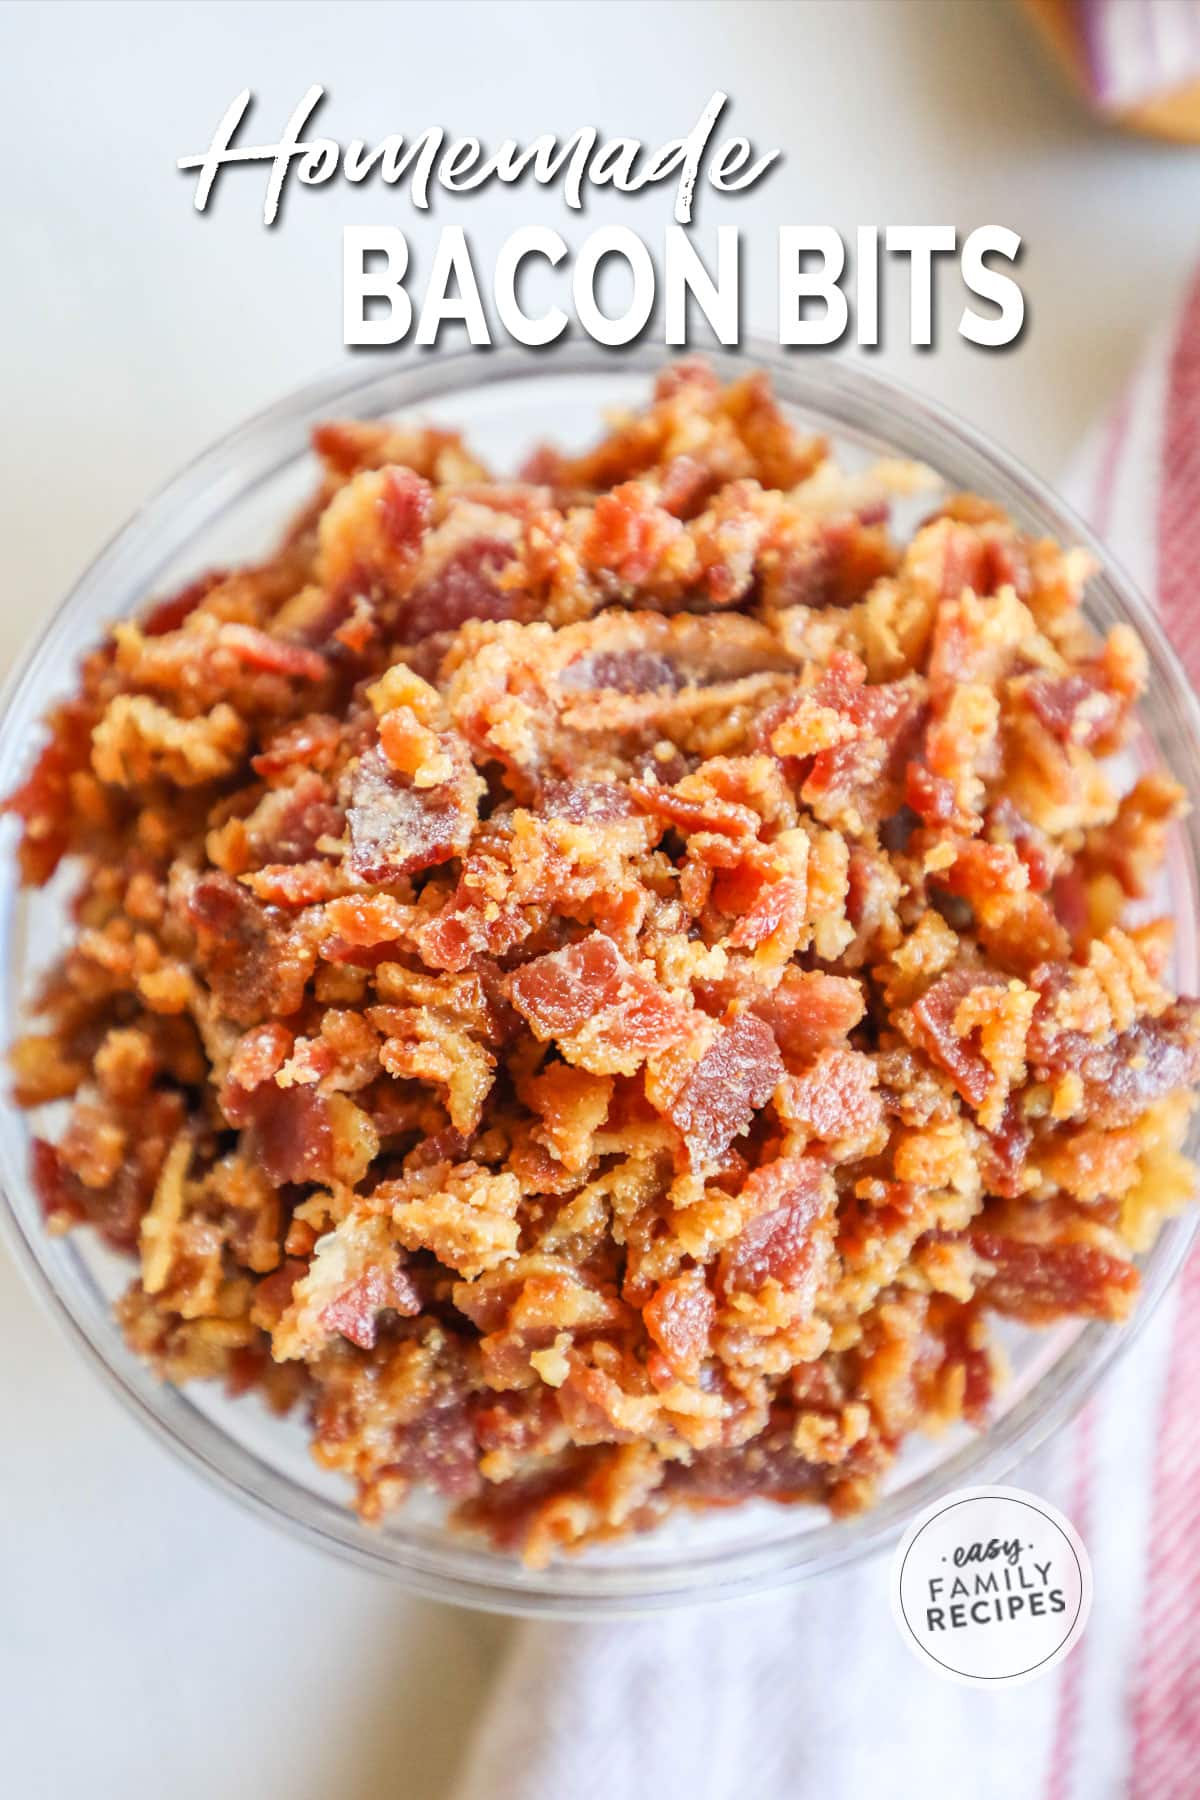 Real bacon bits made in the oven